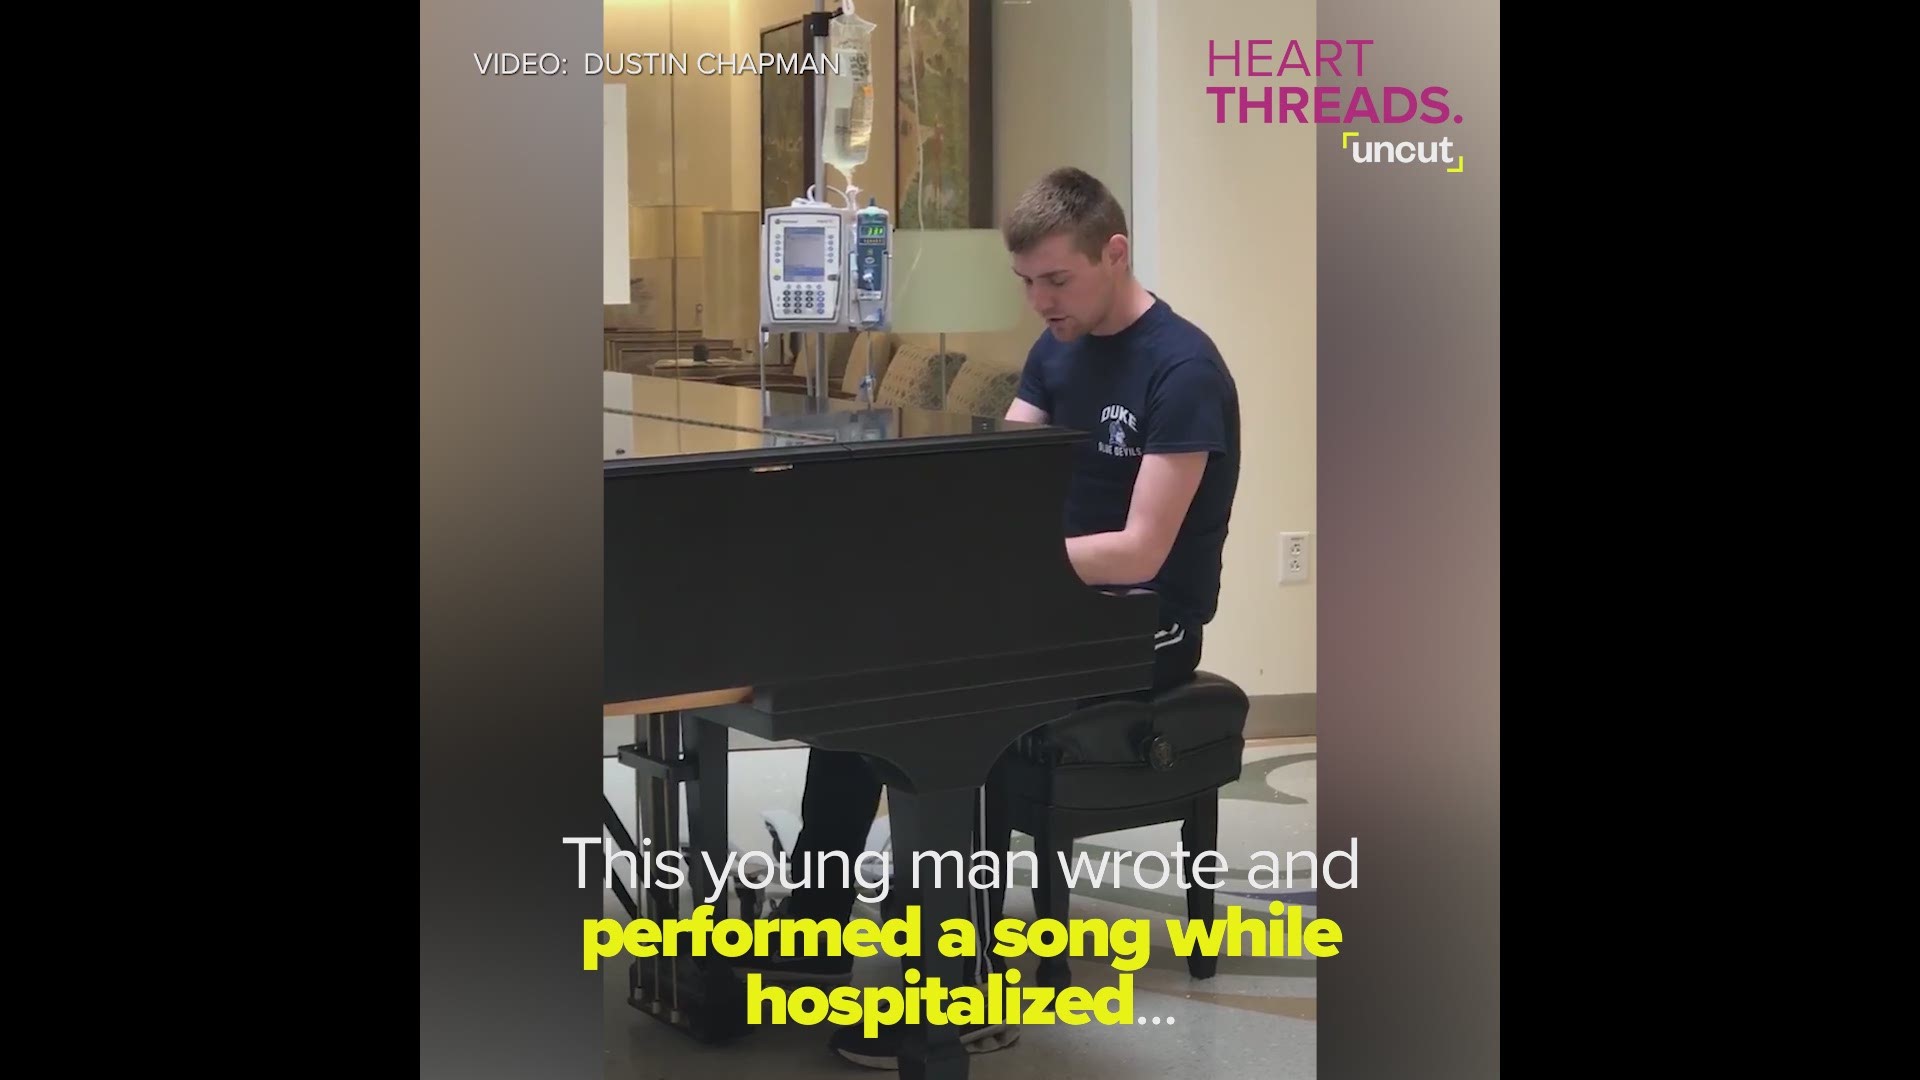 When Dustin was hospitalized for a 16-day stretch, he leaned on his love of music to support himself and other patients.